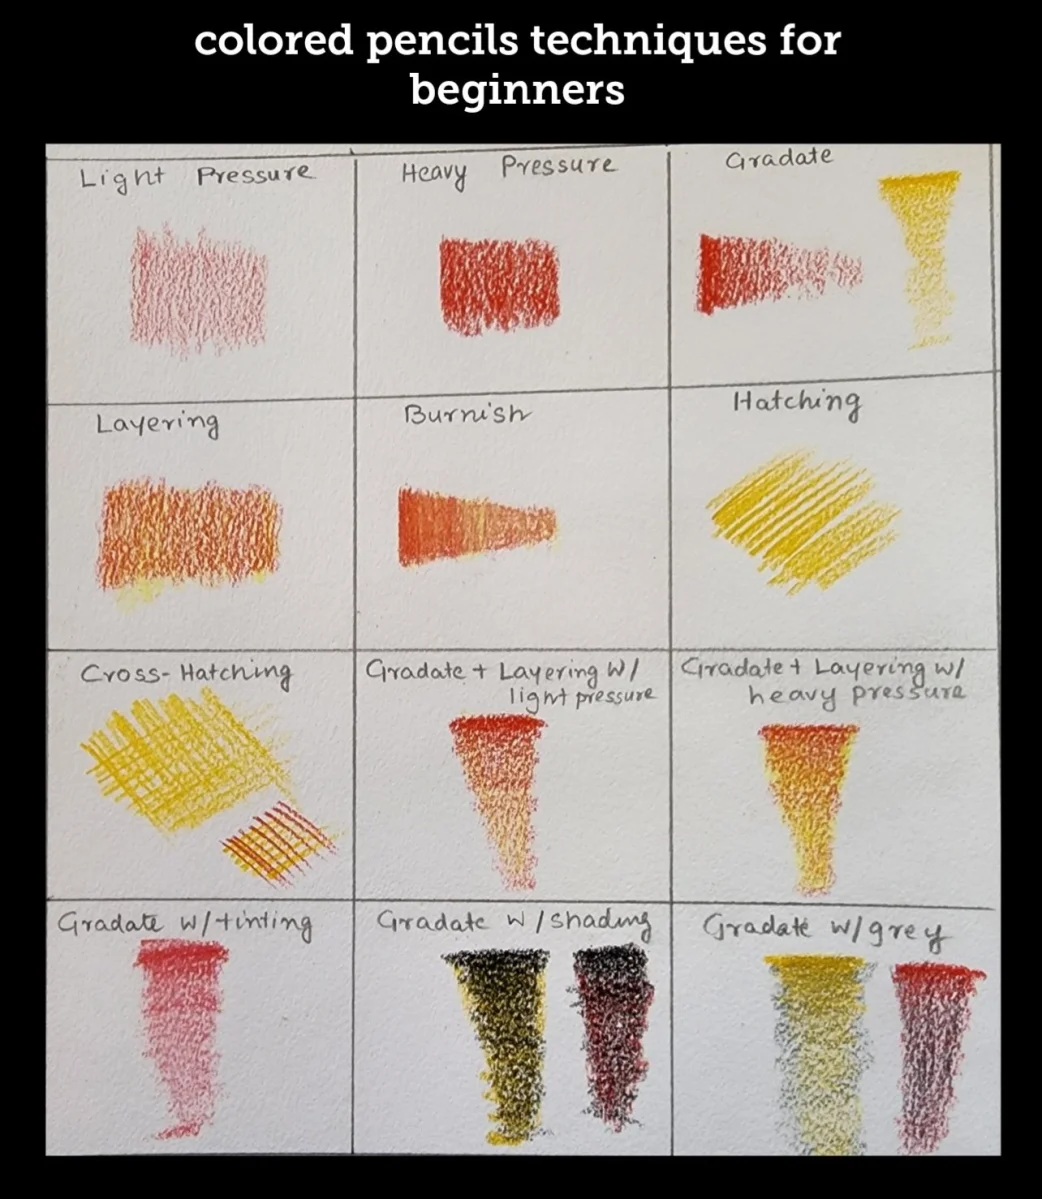 7 Ways of Blending Colored Pencils for Beginners 